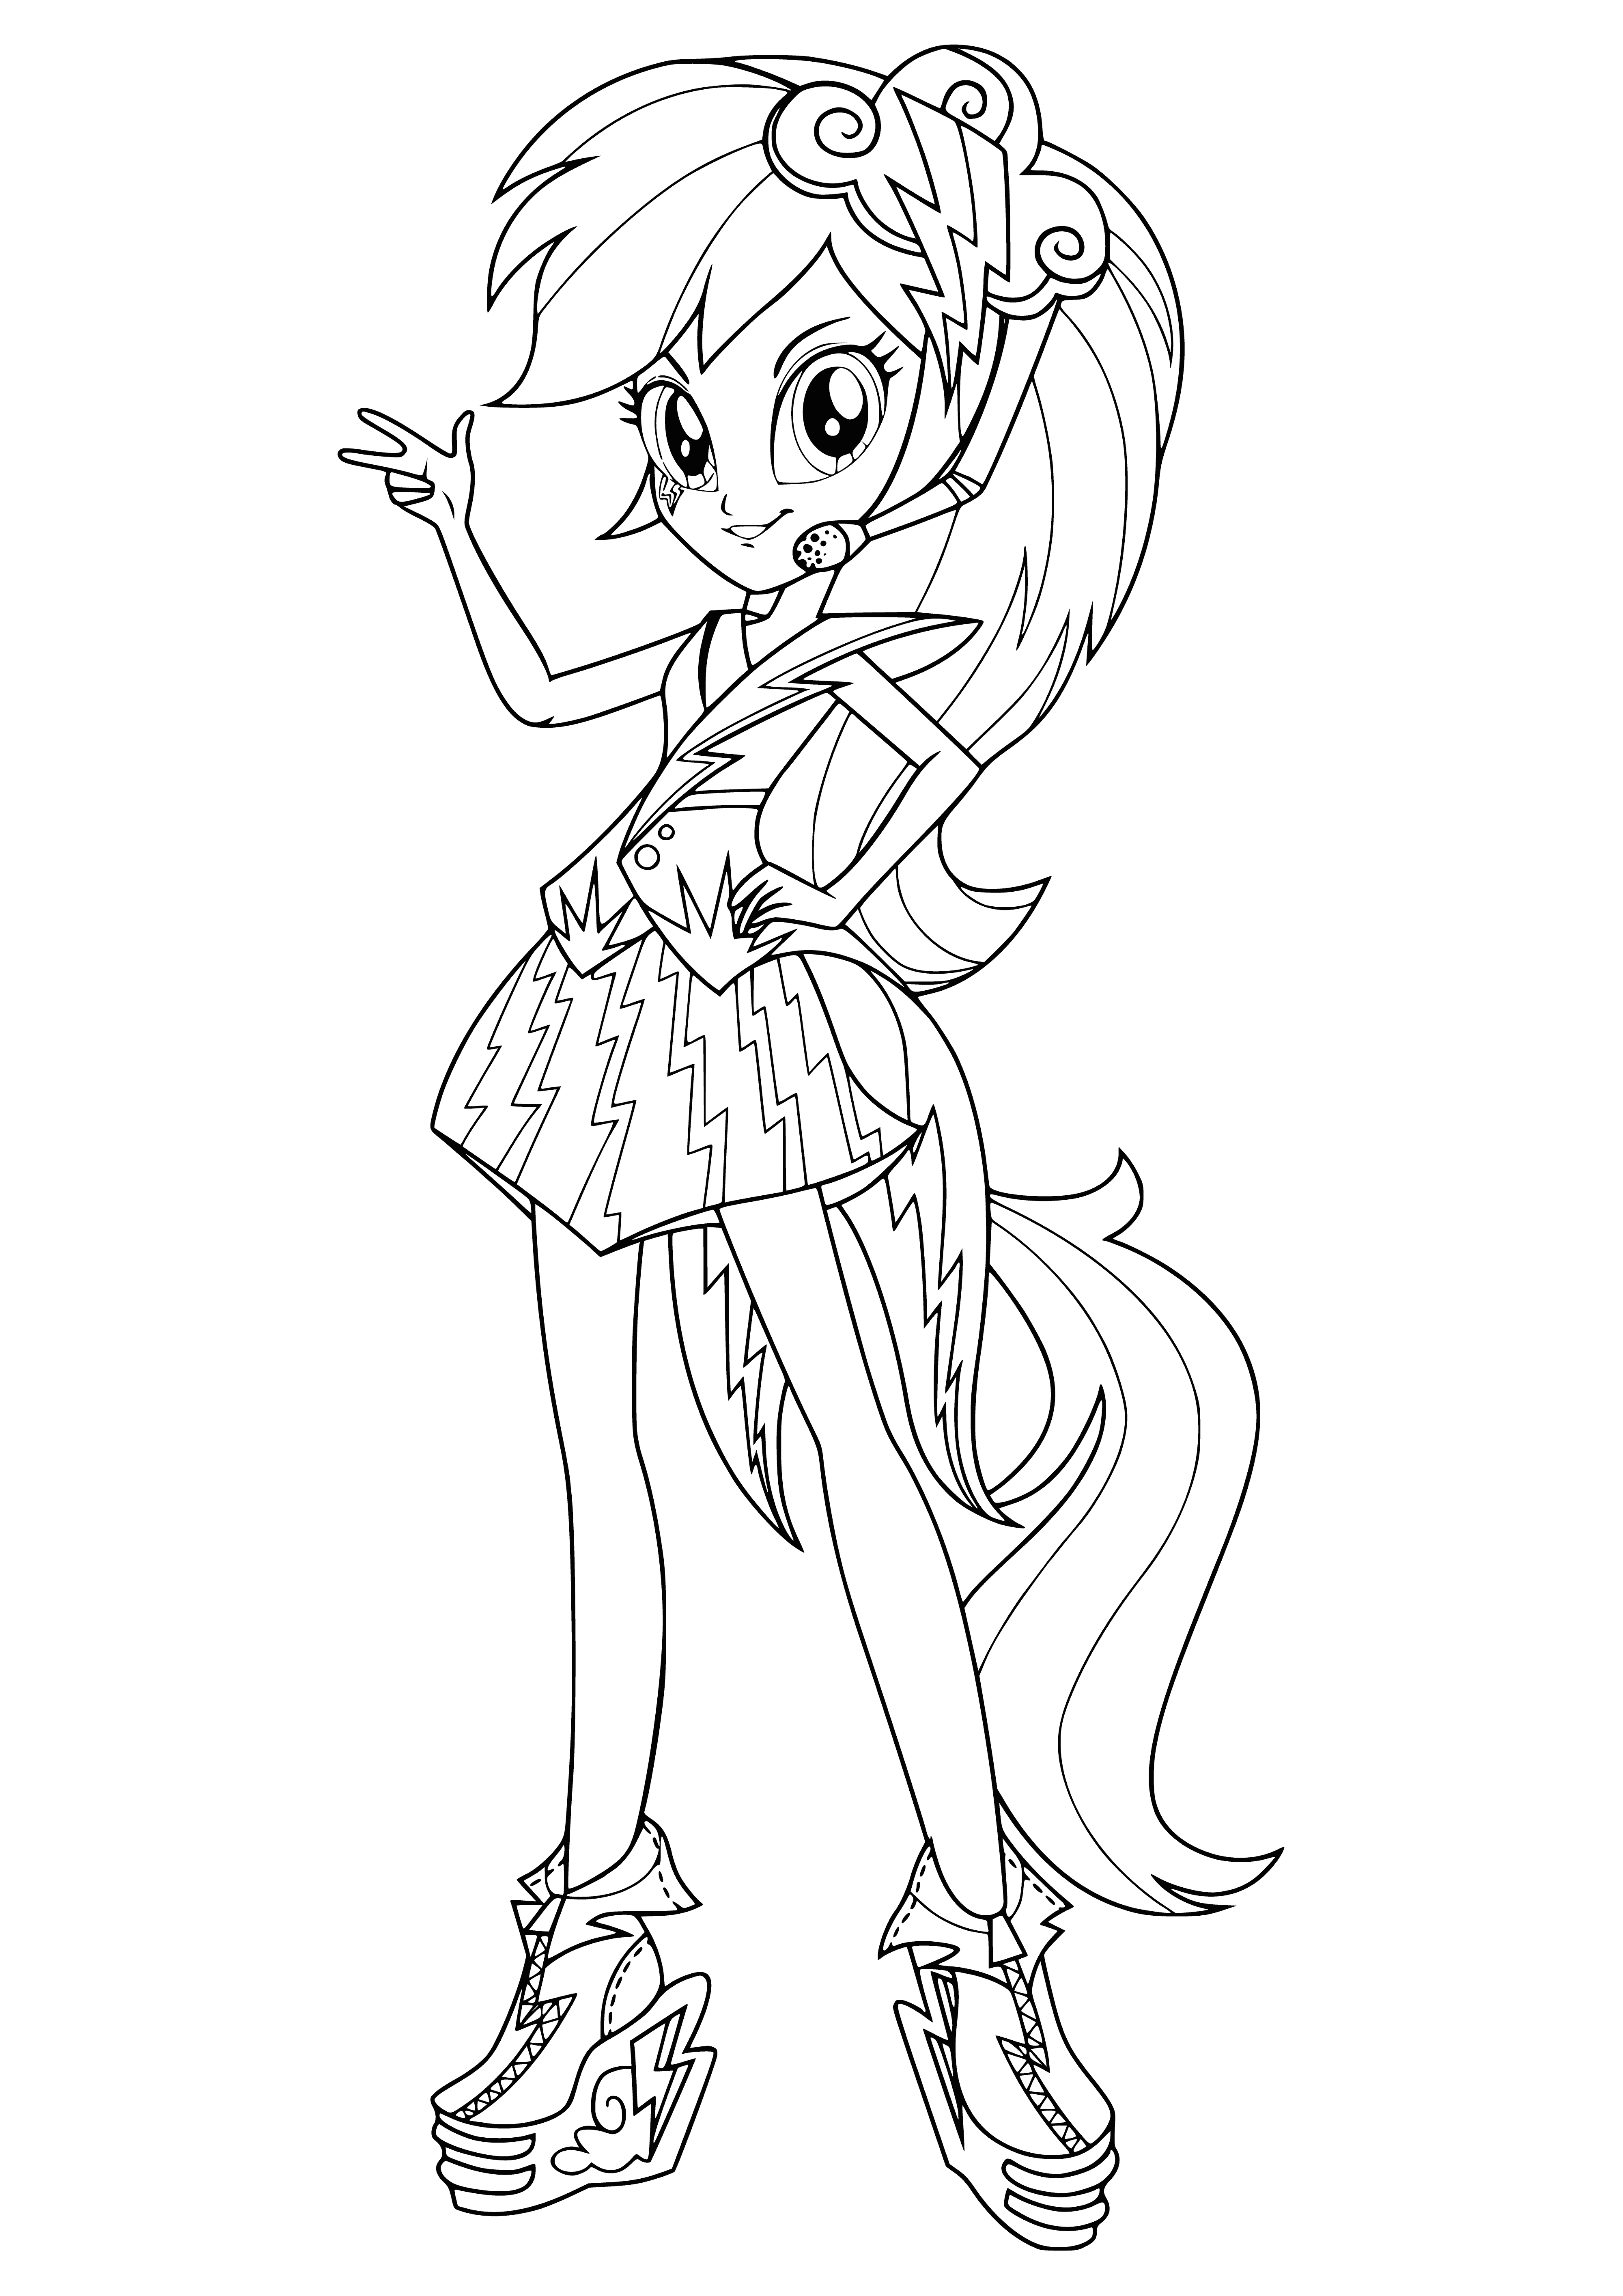 coloring page: Rainbow Dash is a teenage girl with blue eyes, purple hair and blue/yellow/pink clothes. Holding a white/purple guitar, she brings energy and style. #MyLittlePony